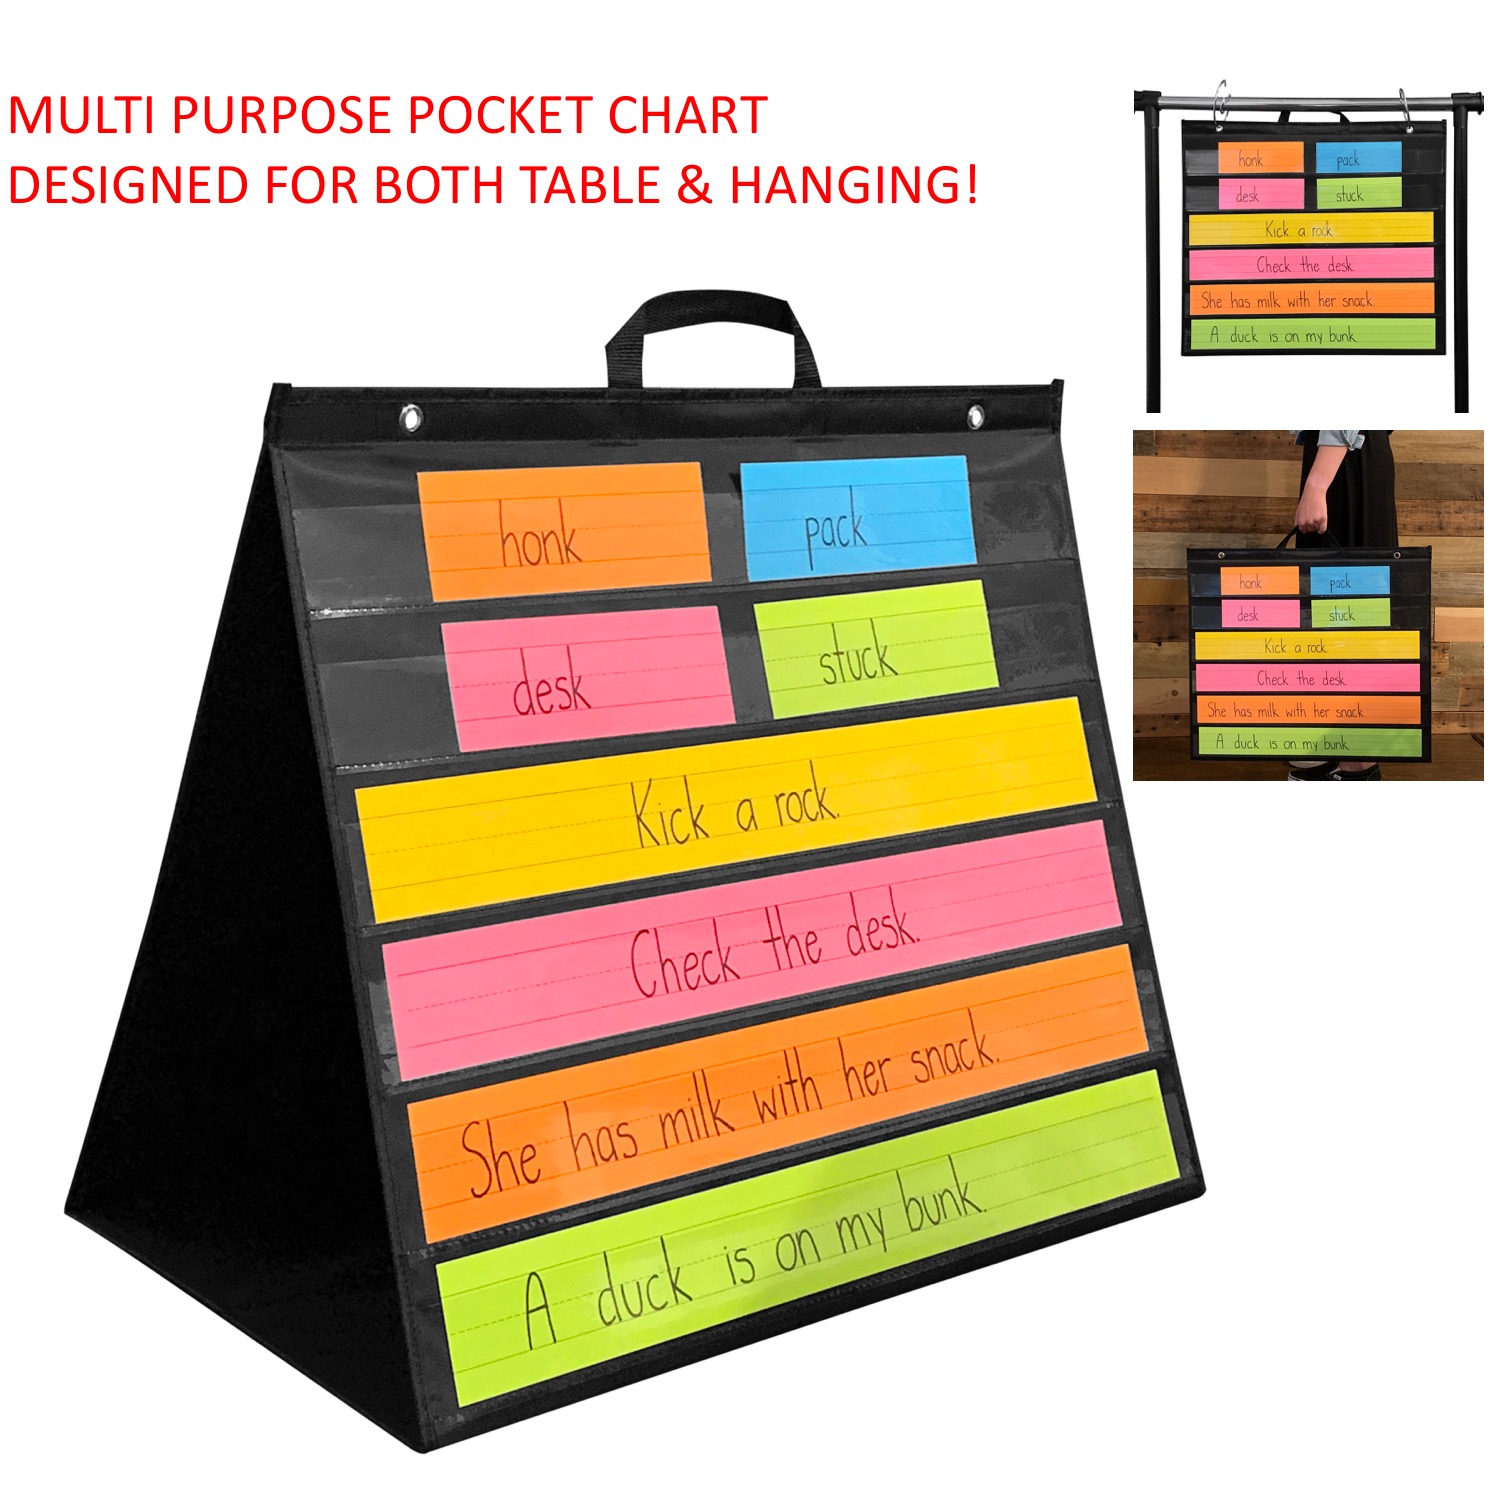 Large Double Sided Table/Hanging Pocket Chart with Handle PDX Reading